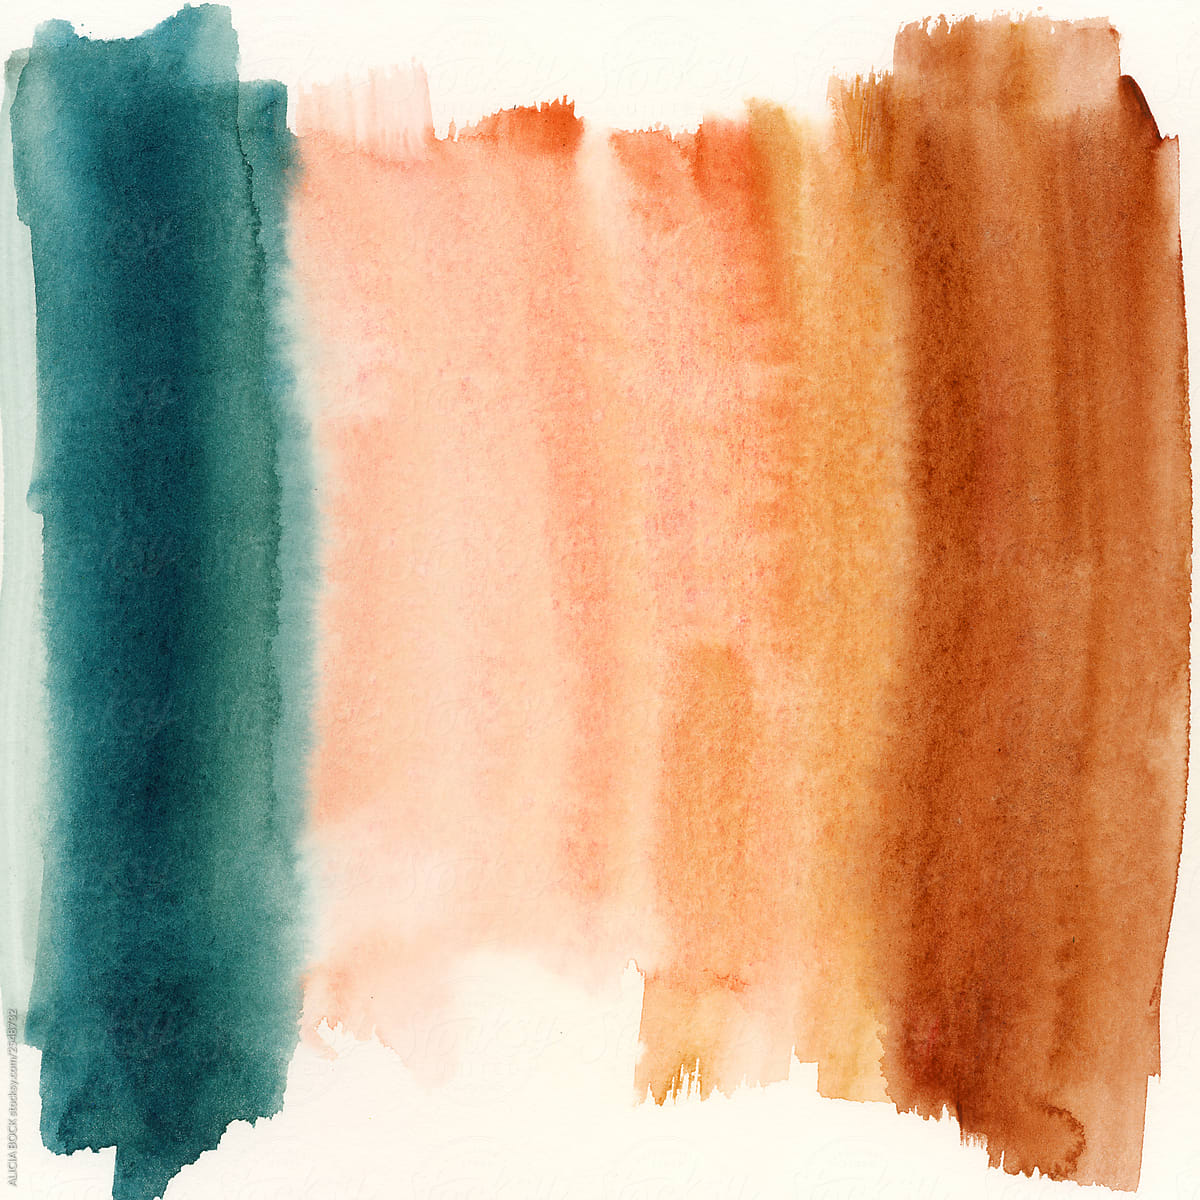 Coral, Teal and Rust Colored Abstract Watercolor Painting